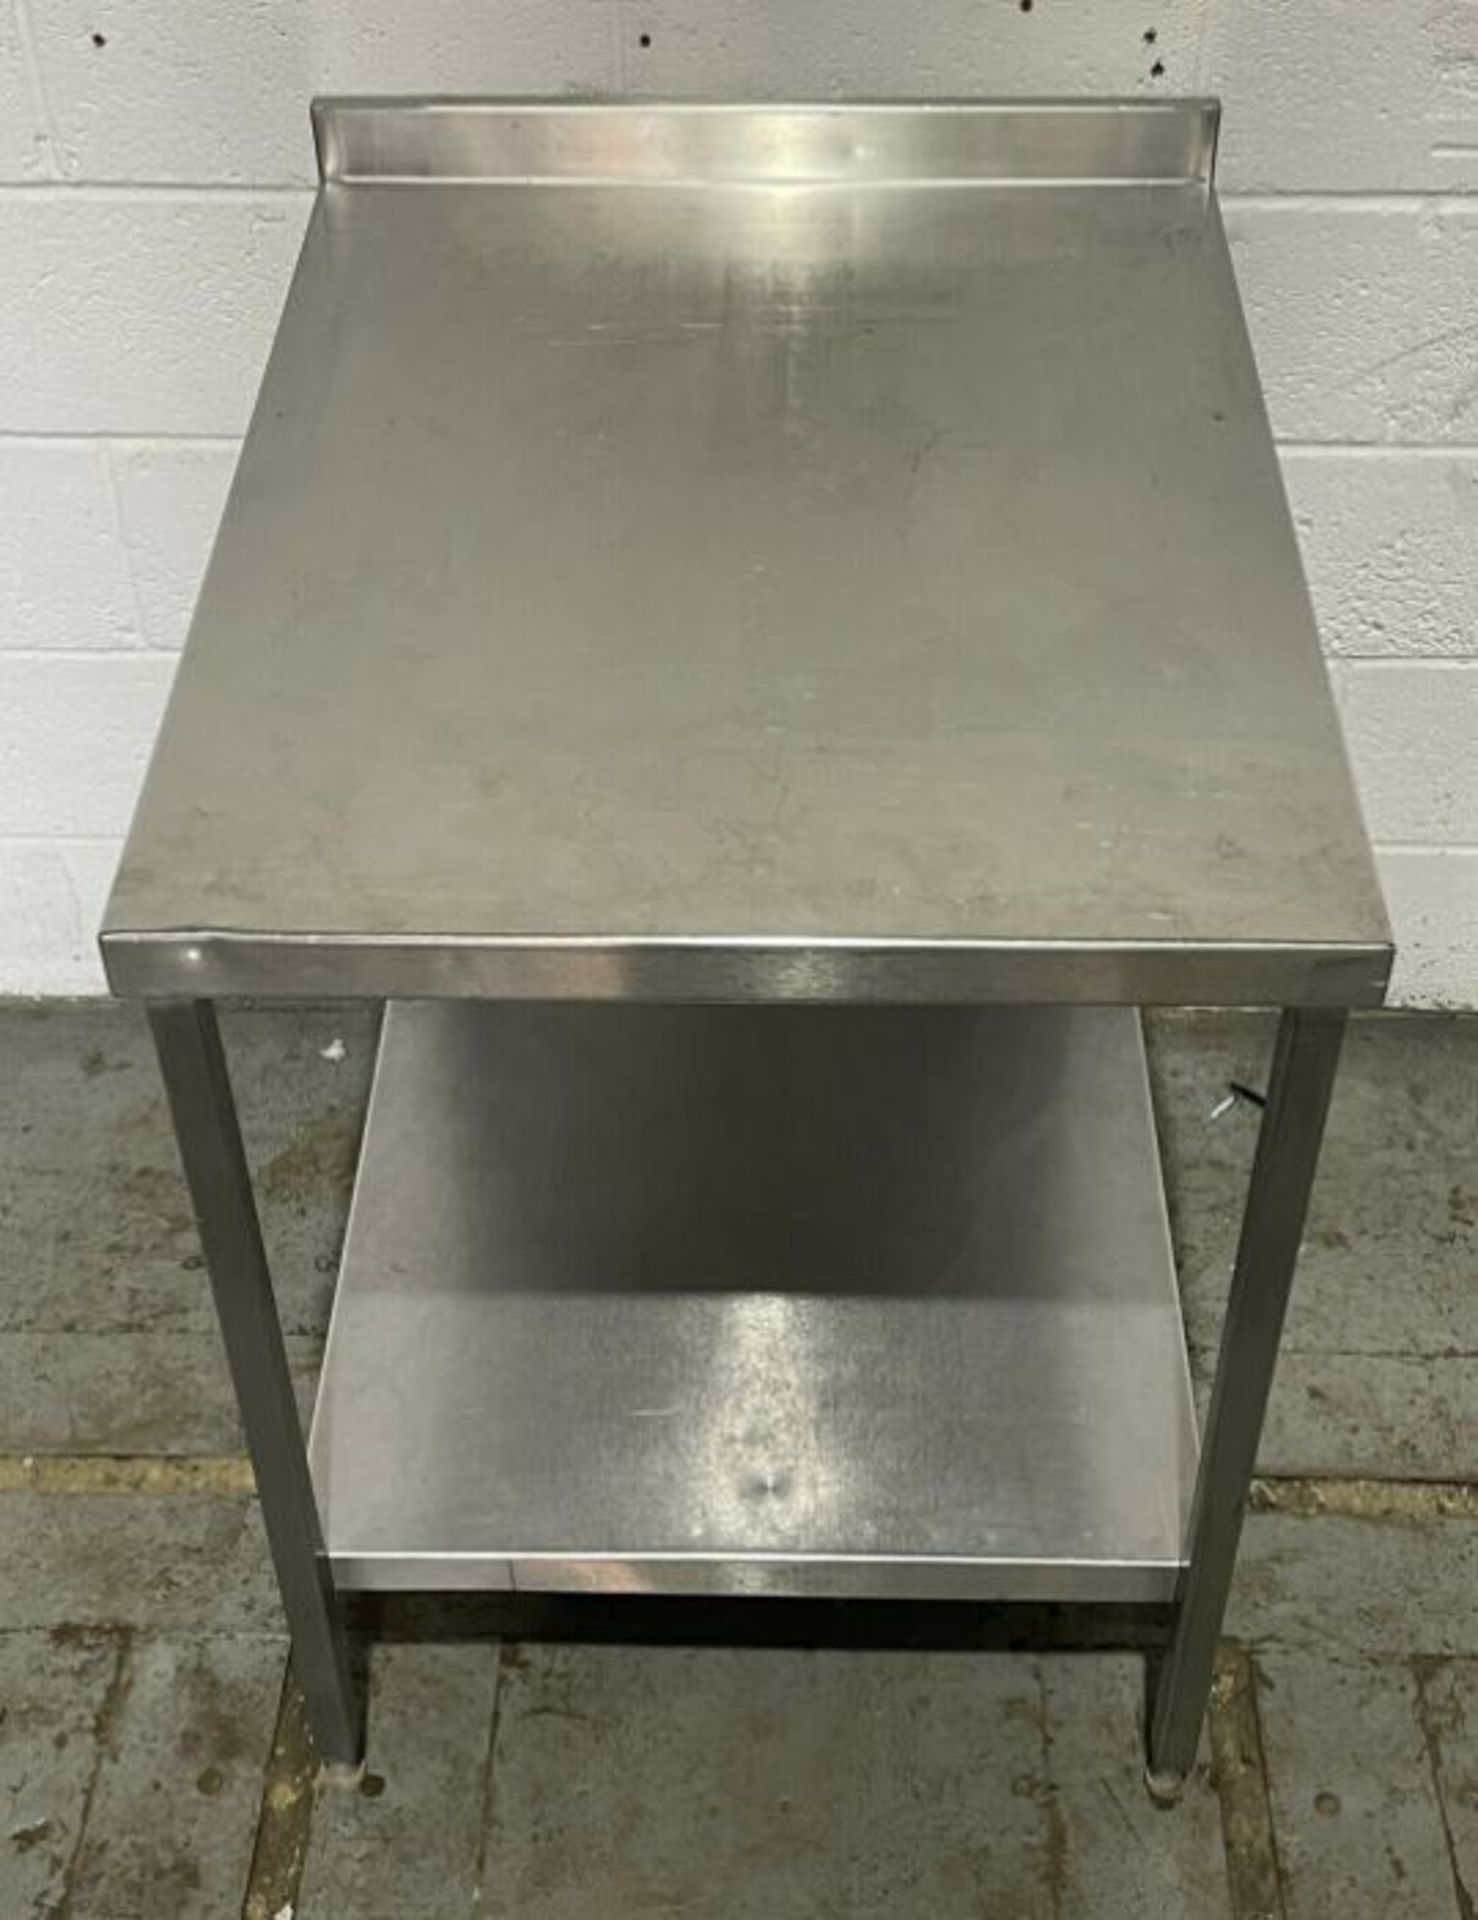 Stainless Steel Preparation Table - Image 5 of 5